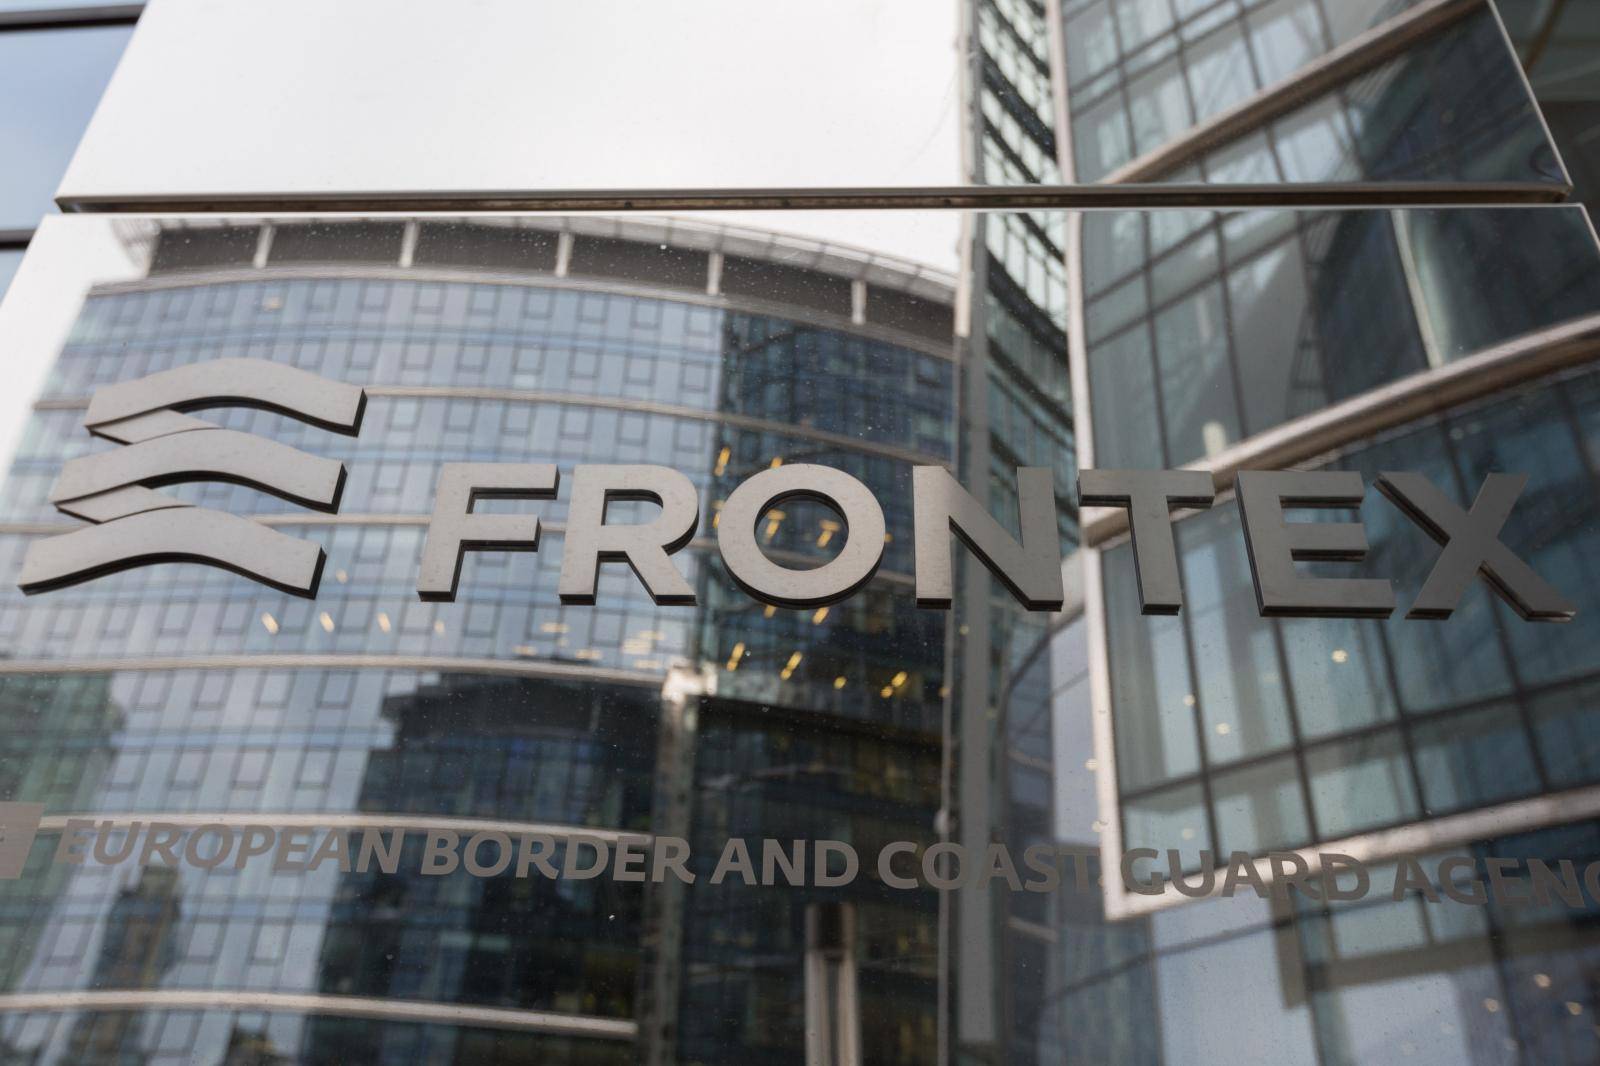 Inauguration for the FRONTEX headquarter in Warsaw